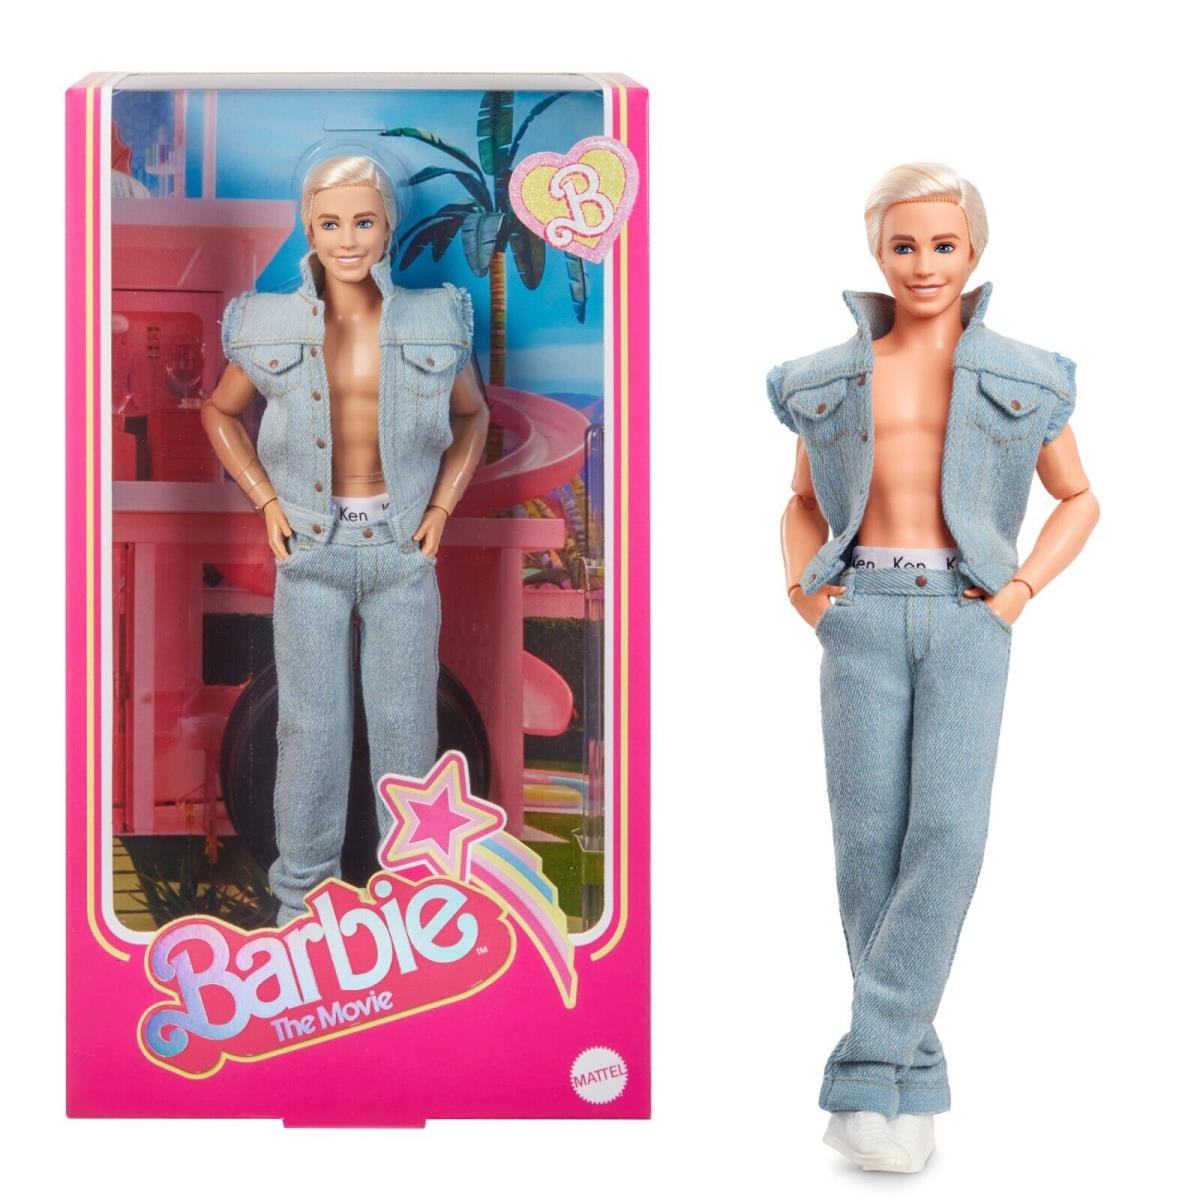 Barbie The Movie Collectible Ken Doll Wearing All-denim Matching Set with Orig